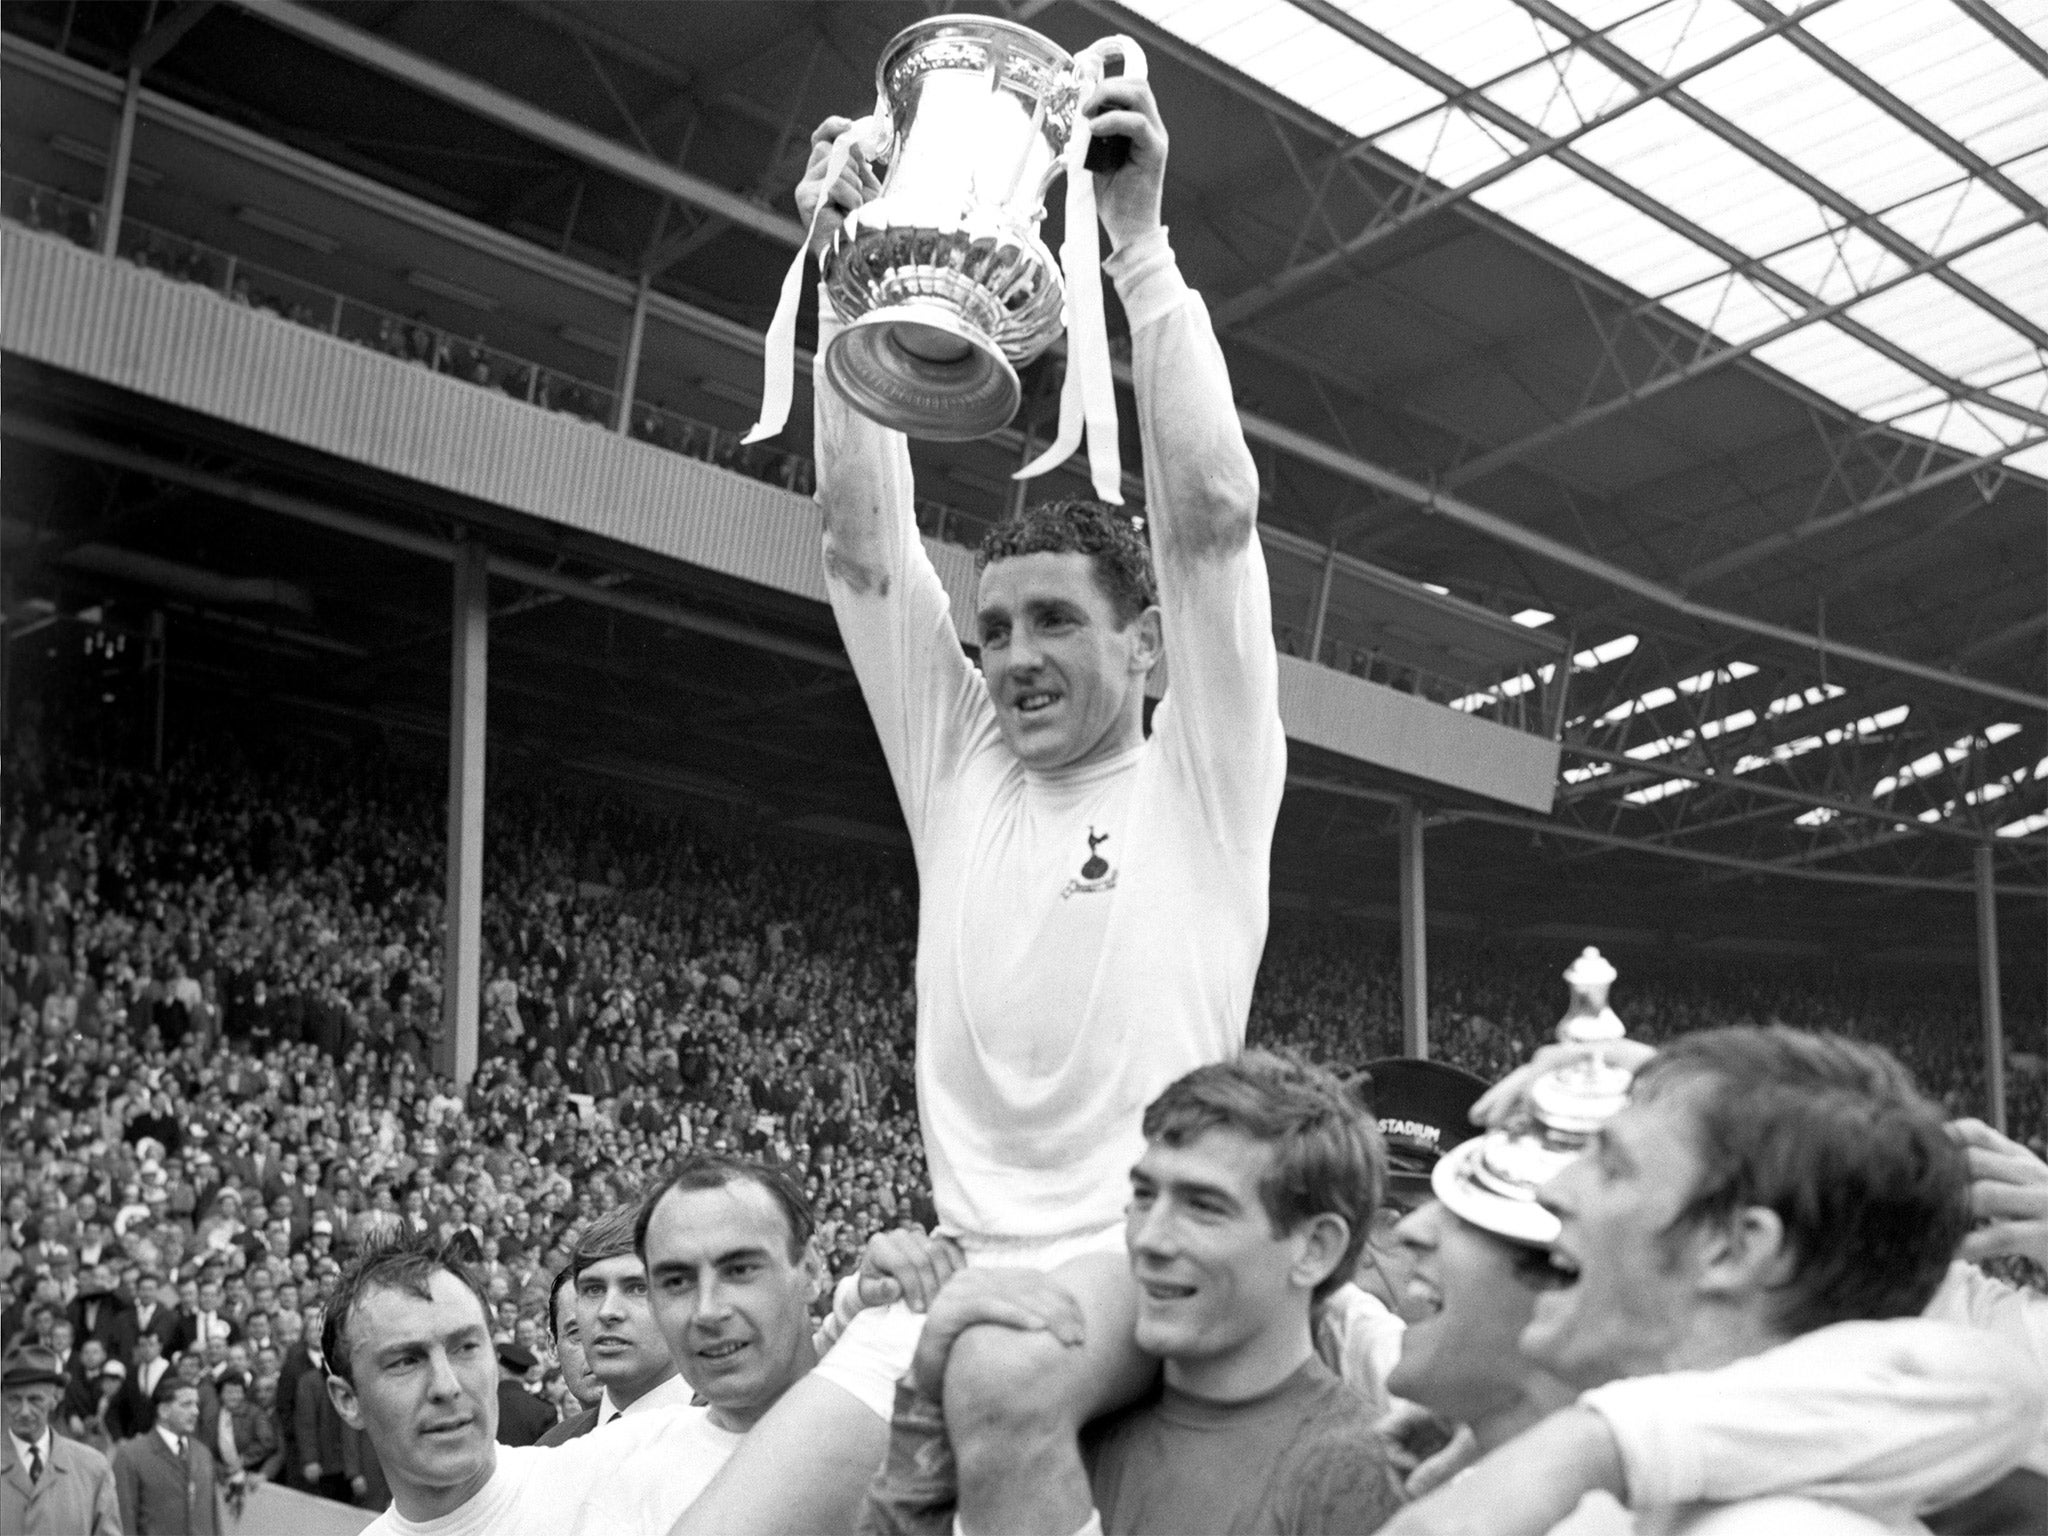 Dave Mackay holds the FA Cup trophy aloft following Tottenham Hotspur's victory in 1967